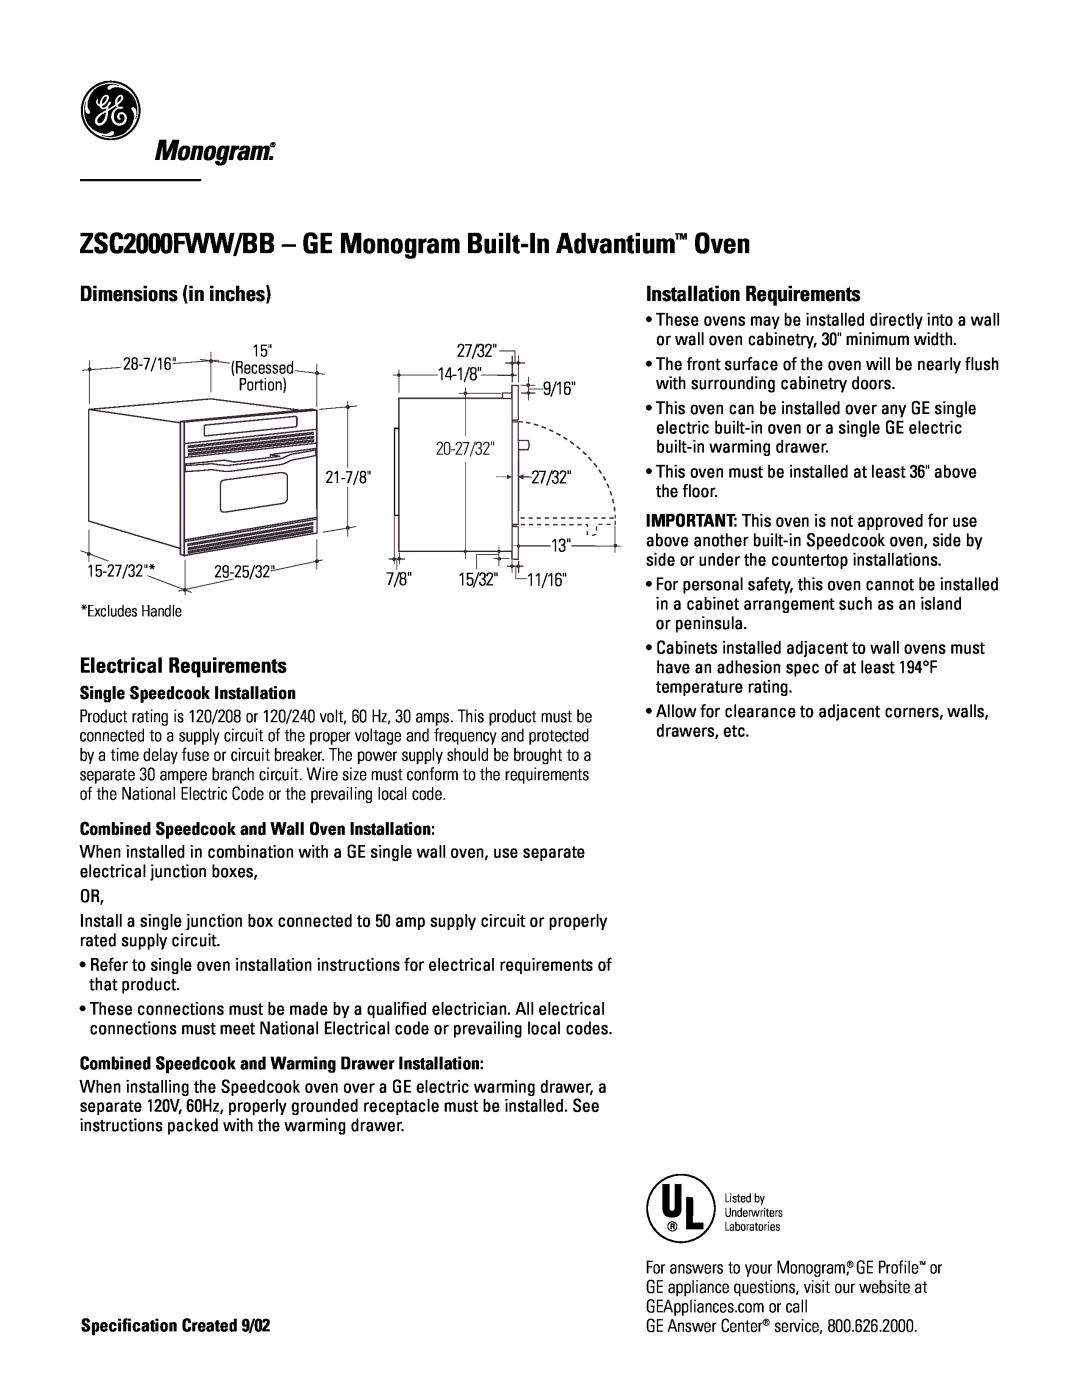 GE Monogram ZSC2000FWW/BB dimensions Dimensions in inches, Electrical Requirements, Installation Requirements, 27/32, 9/16 